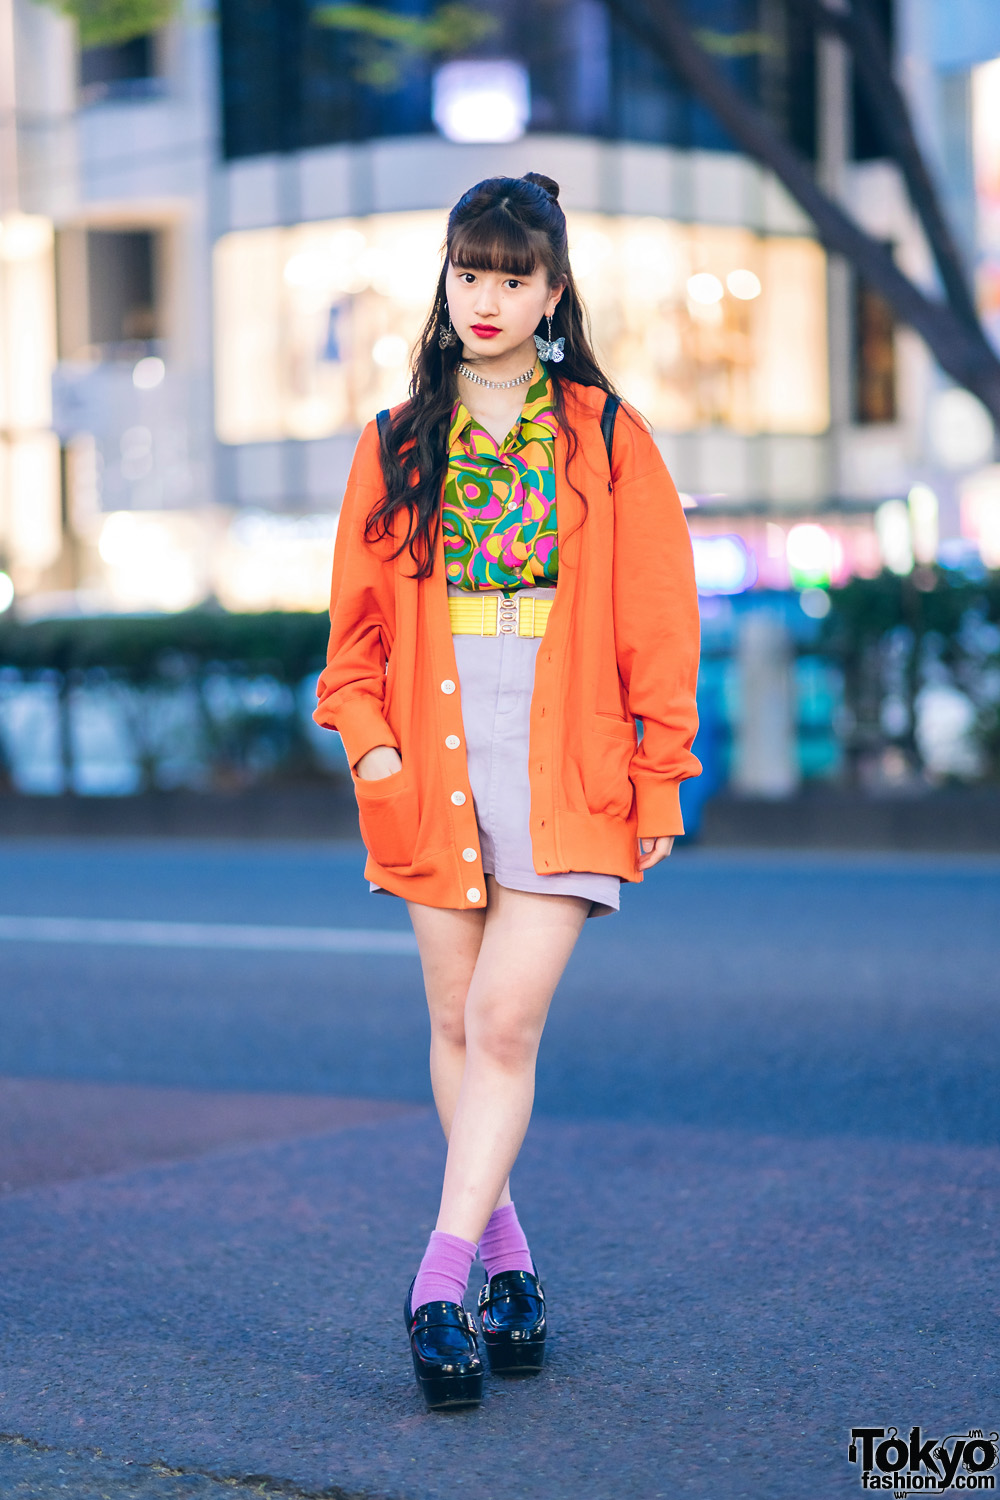 Japanese Pop Idol A-pon in Vintage-Inspired Street Fashion w/ Butterfly  Drop Earrings, Ralph Lauren Cardigan, RRR Vintage, G2? Belt, WEGO Loafers &  Quilted Backpack – Tokyo Fashion